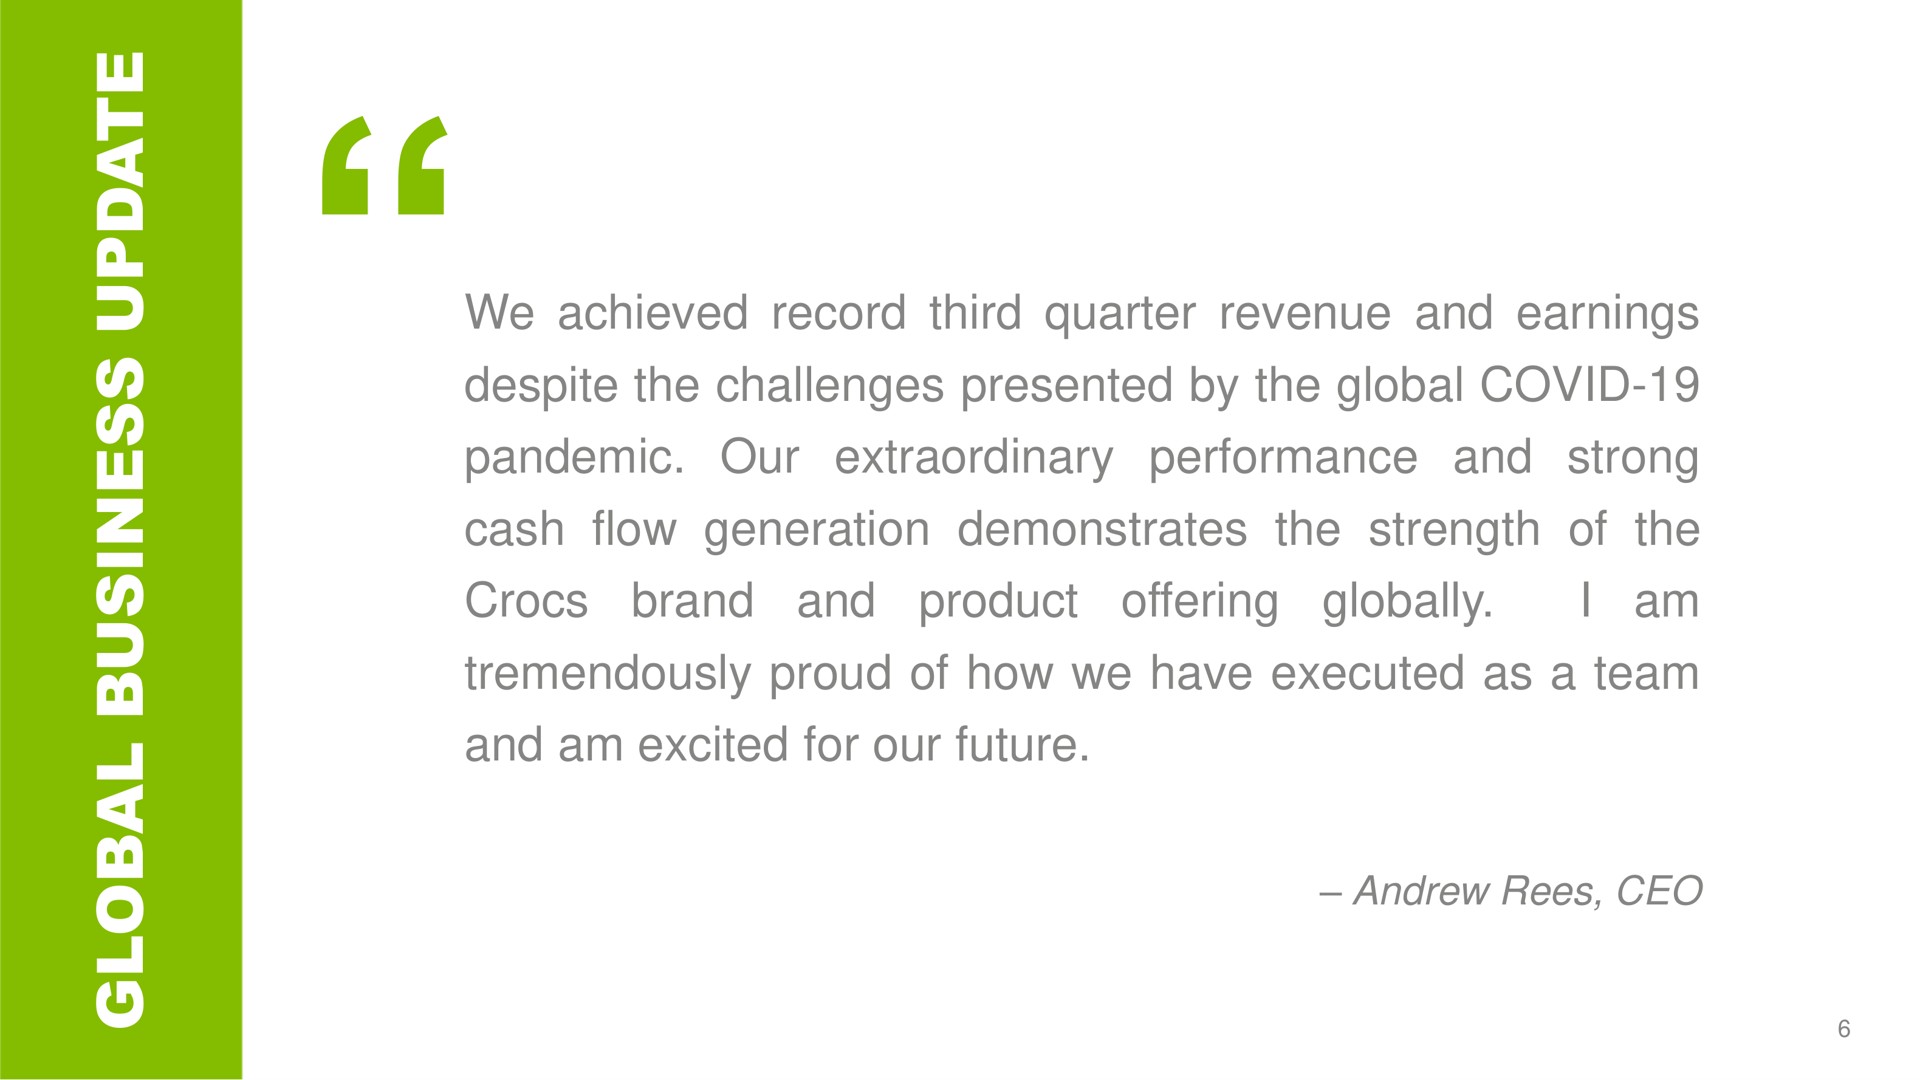 a a we achieved record third quarter revenue and earnings despite the challenges presented by the global covid pandemic our extraordinary performance and strong cash flow generation demonstrates the strength of the i am brand and product offering globally tremendously of how we have executed as a team and am excited for our future | Crocs